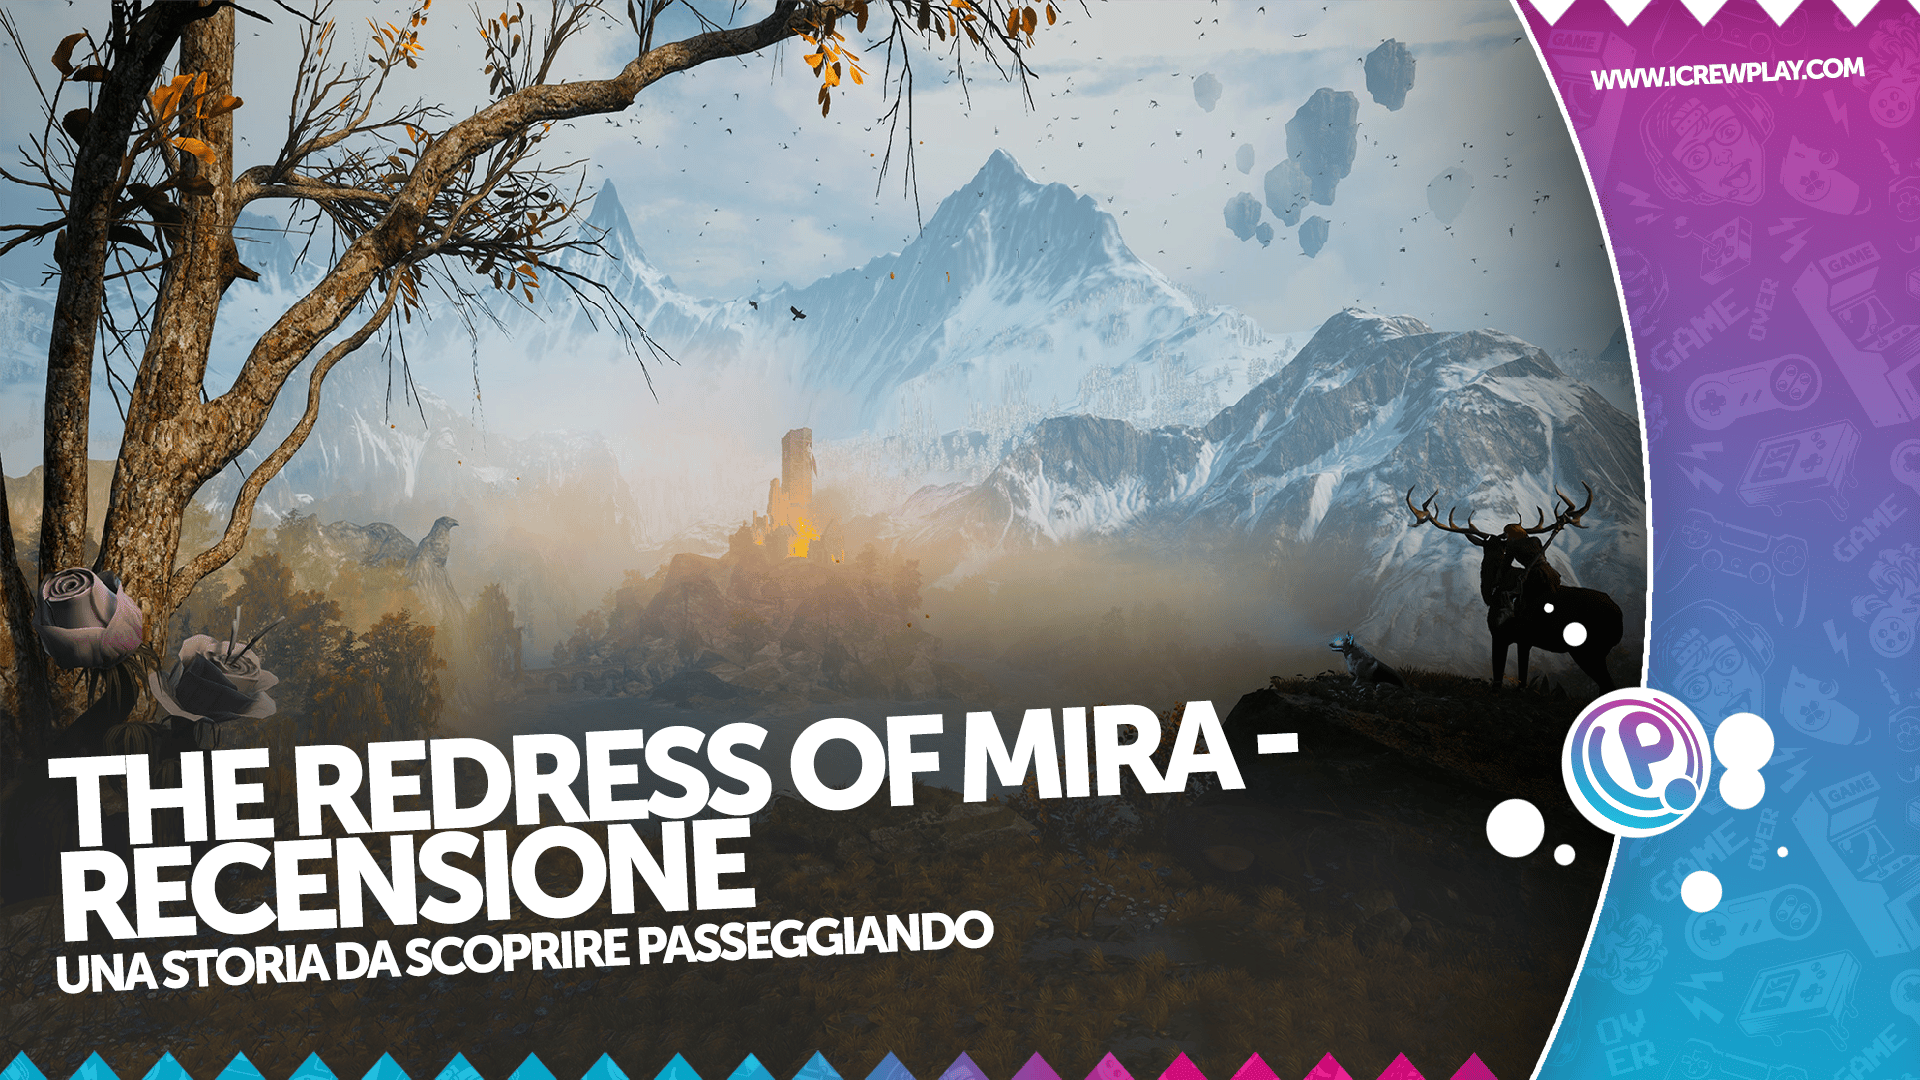 The Redress of Mira Recensione